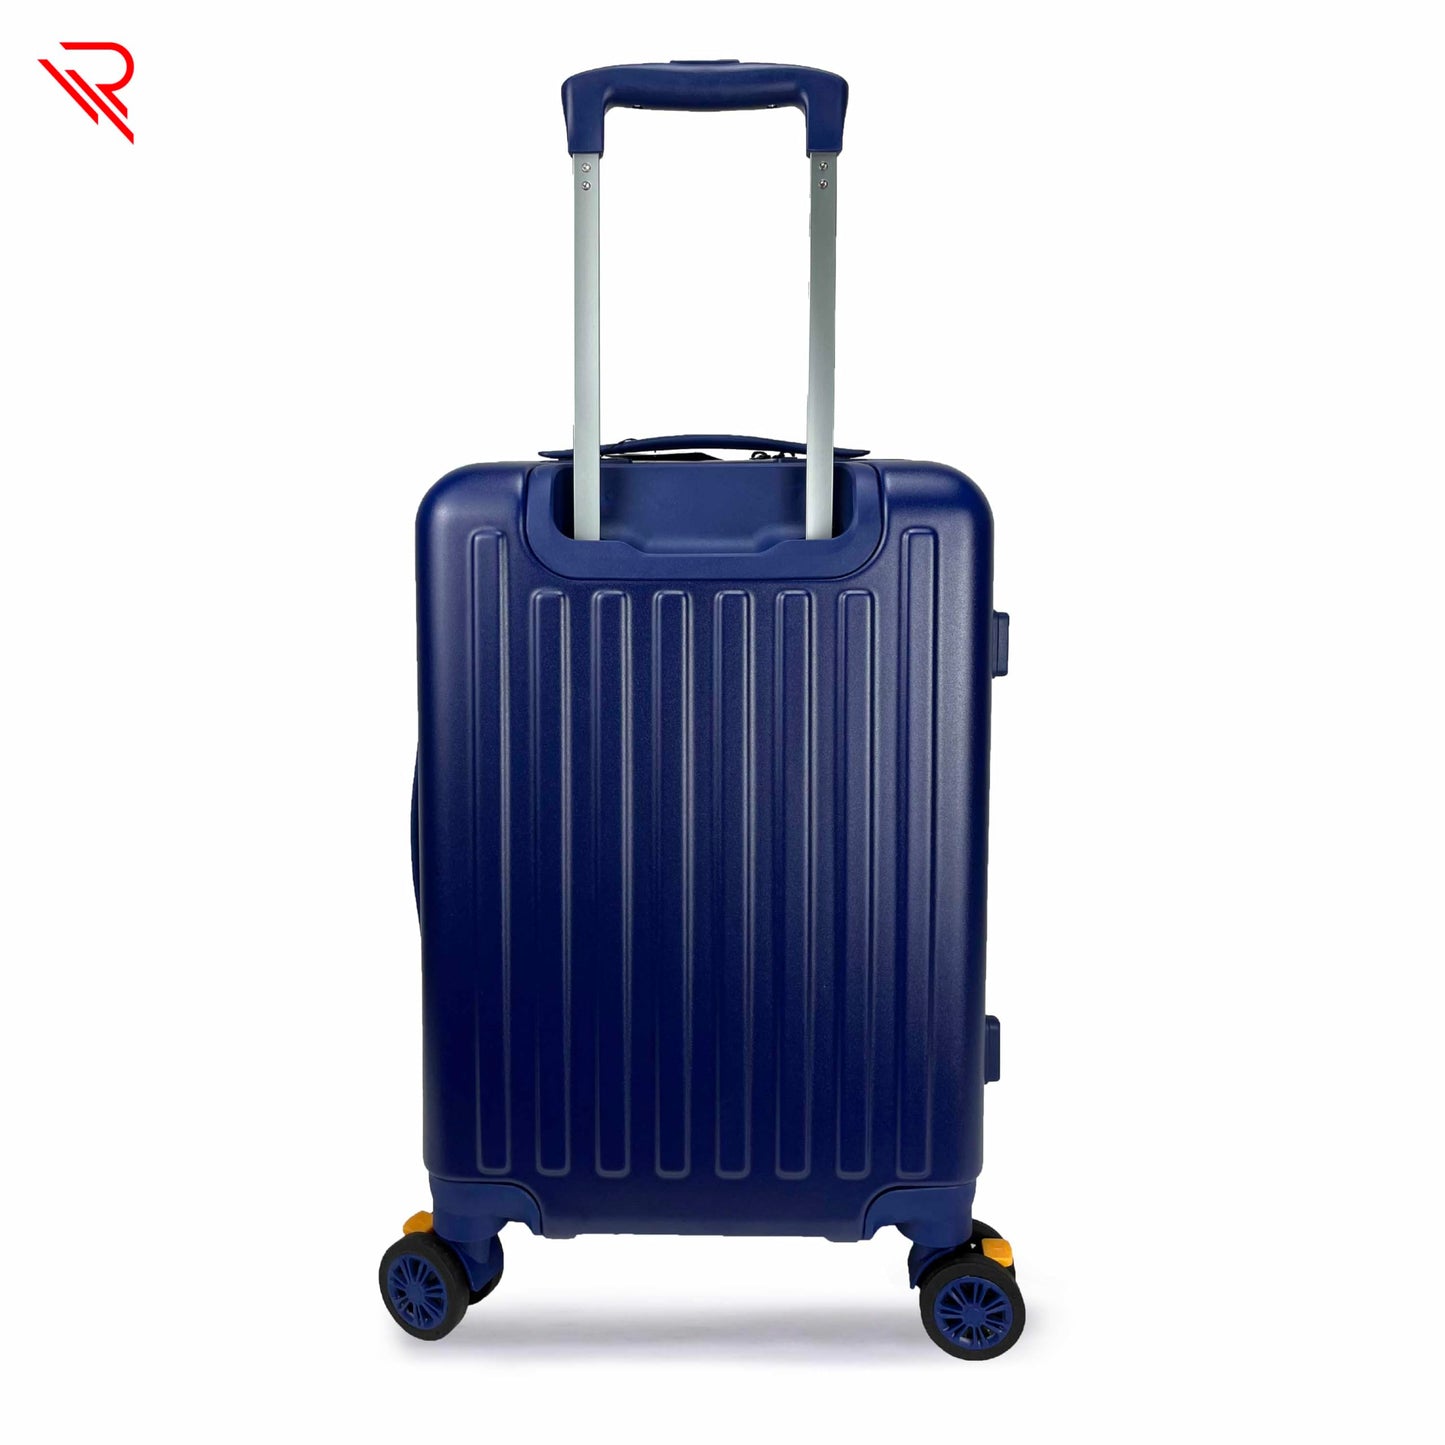 REFLECTION Business Travel 20"Carry On Luggage with Front Open Laptop Compartment|Hardside Suitcase|4 Spinner Wheels|Premium Quality|Professional look(Blue)